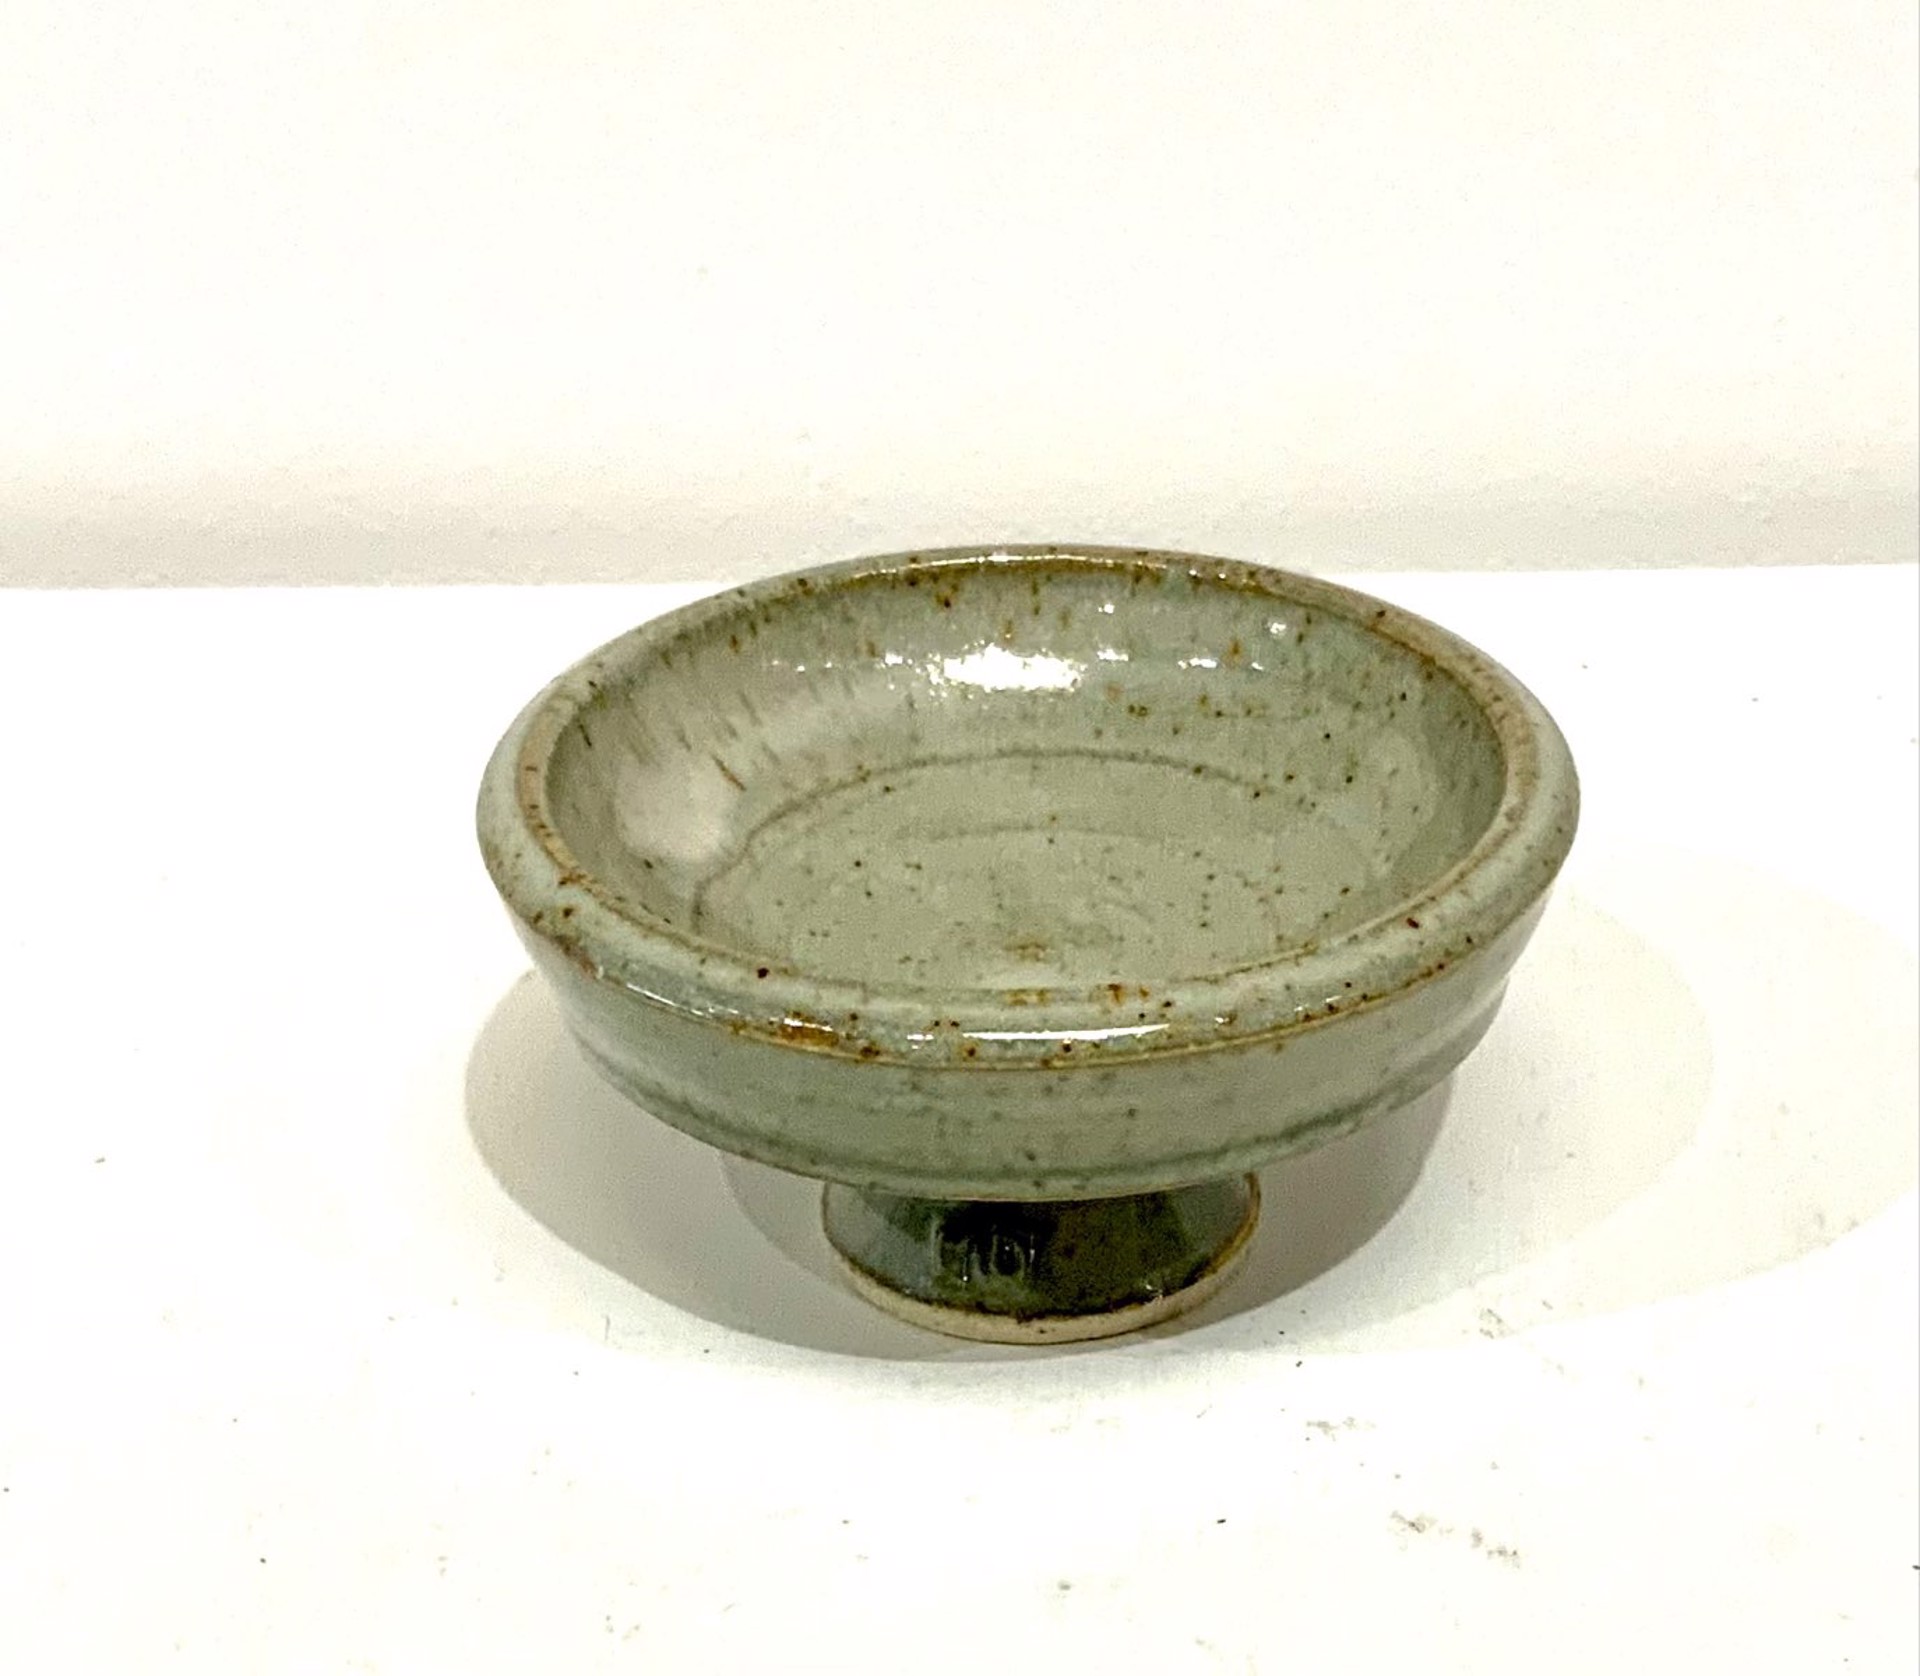 Condiment Dish or Baby Bowl by Marian Draper